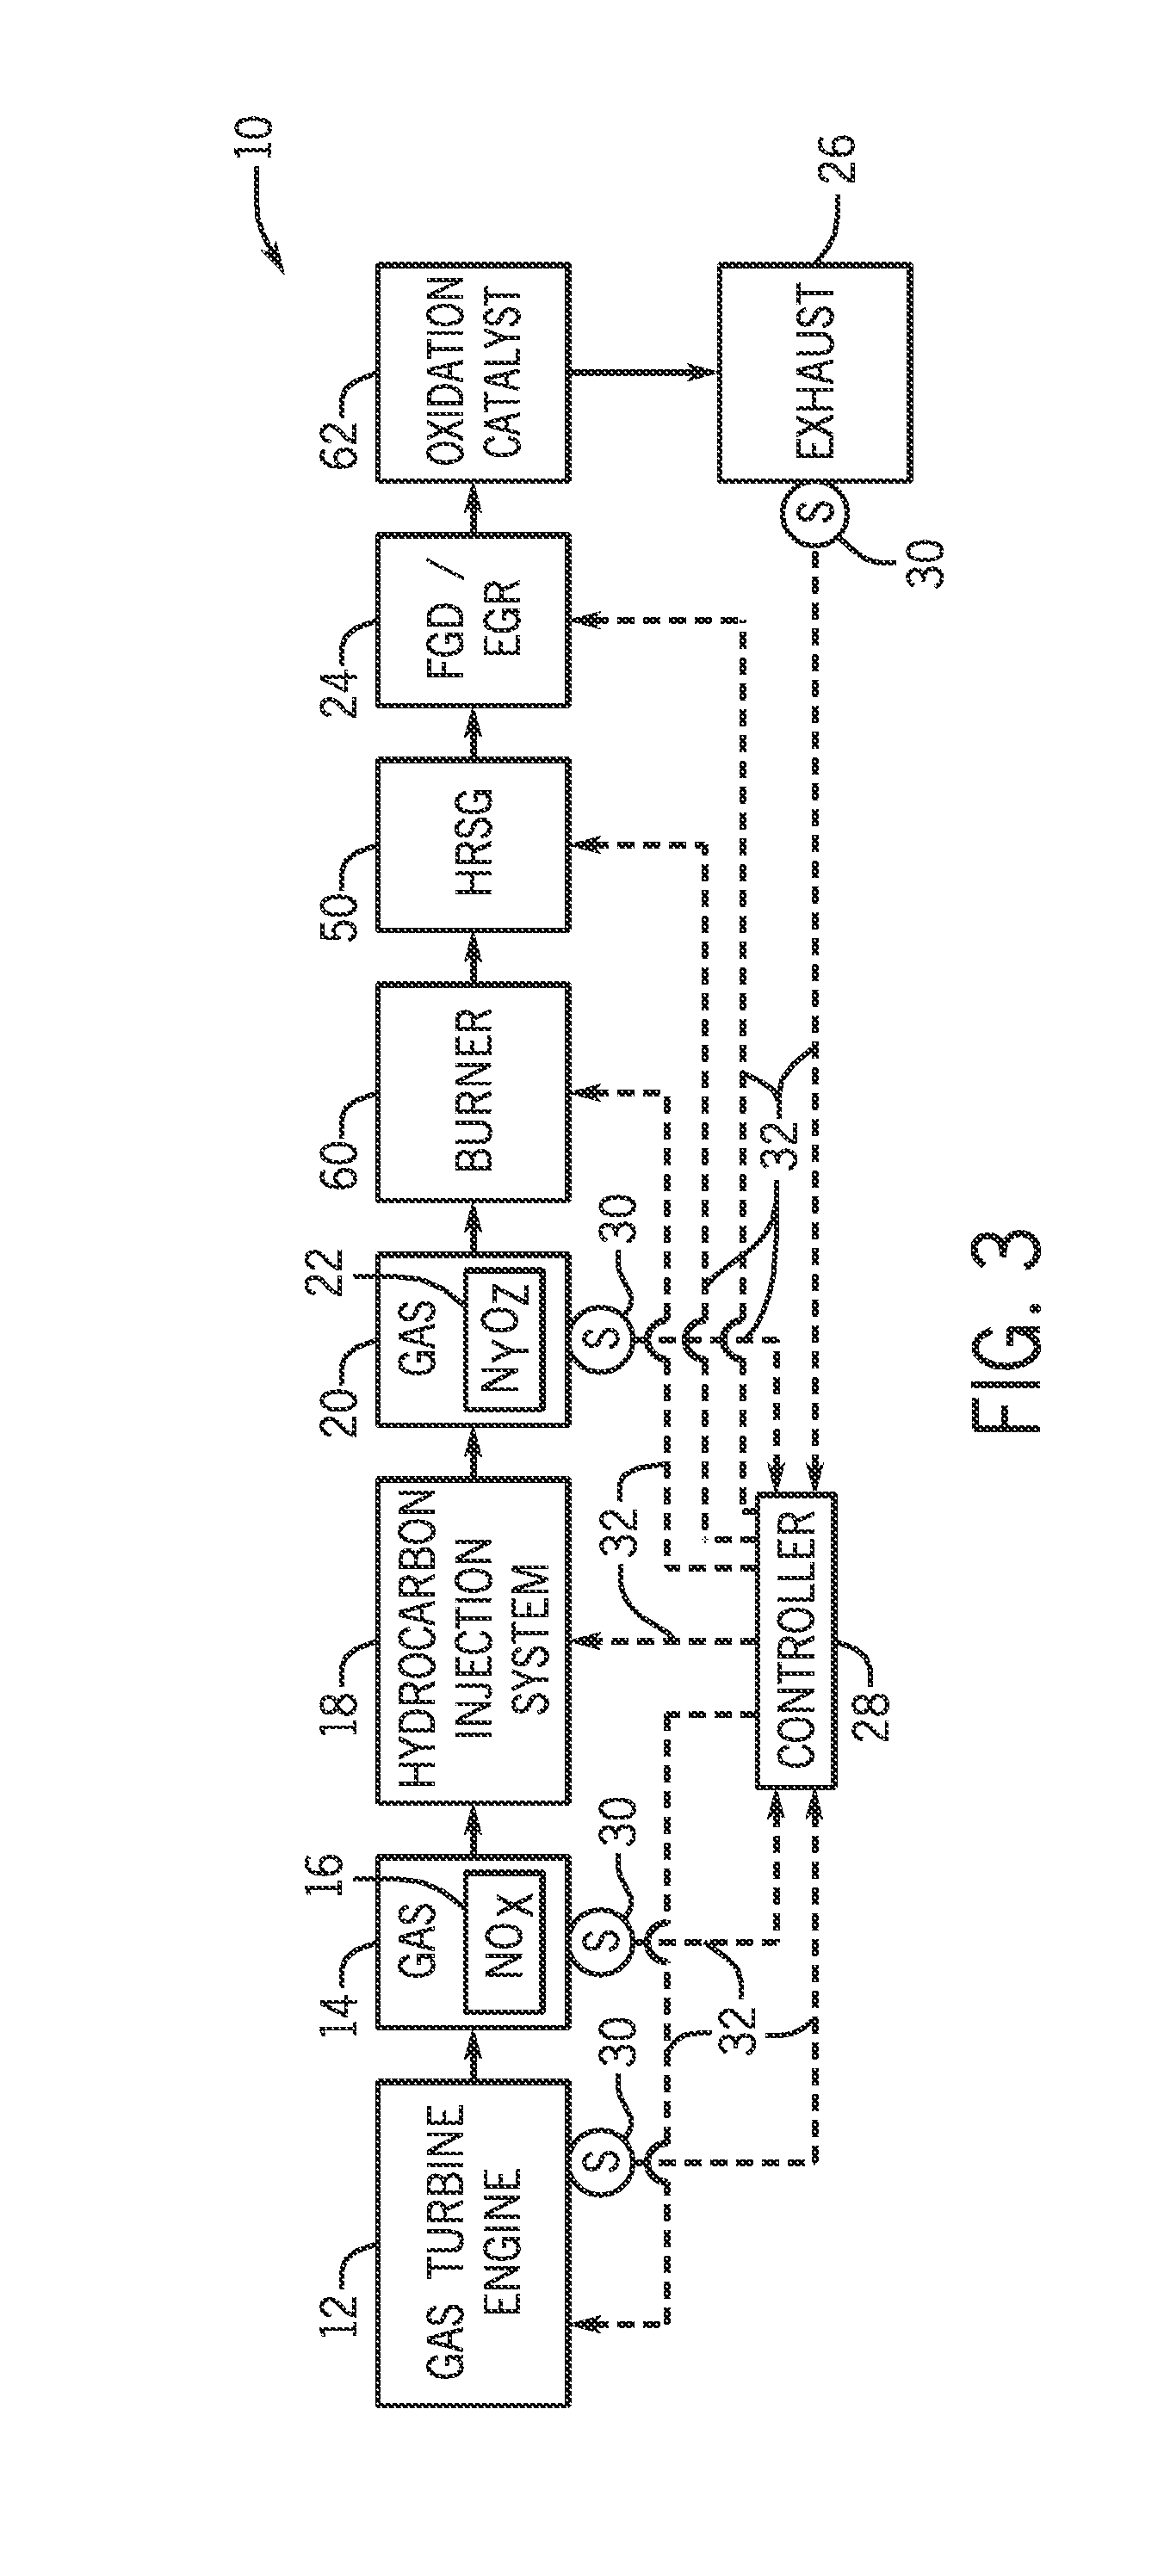 SYSTEM AND METHOD FOR CONTROLLING AND REDUCING NOx EMISSIONS